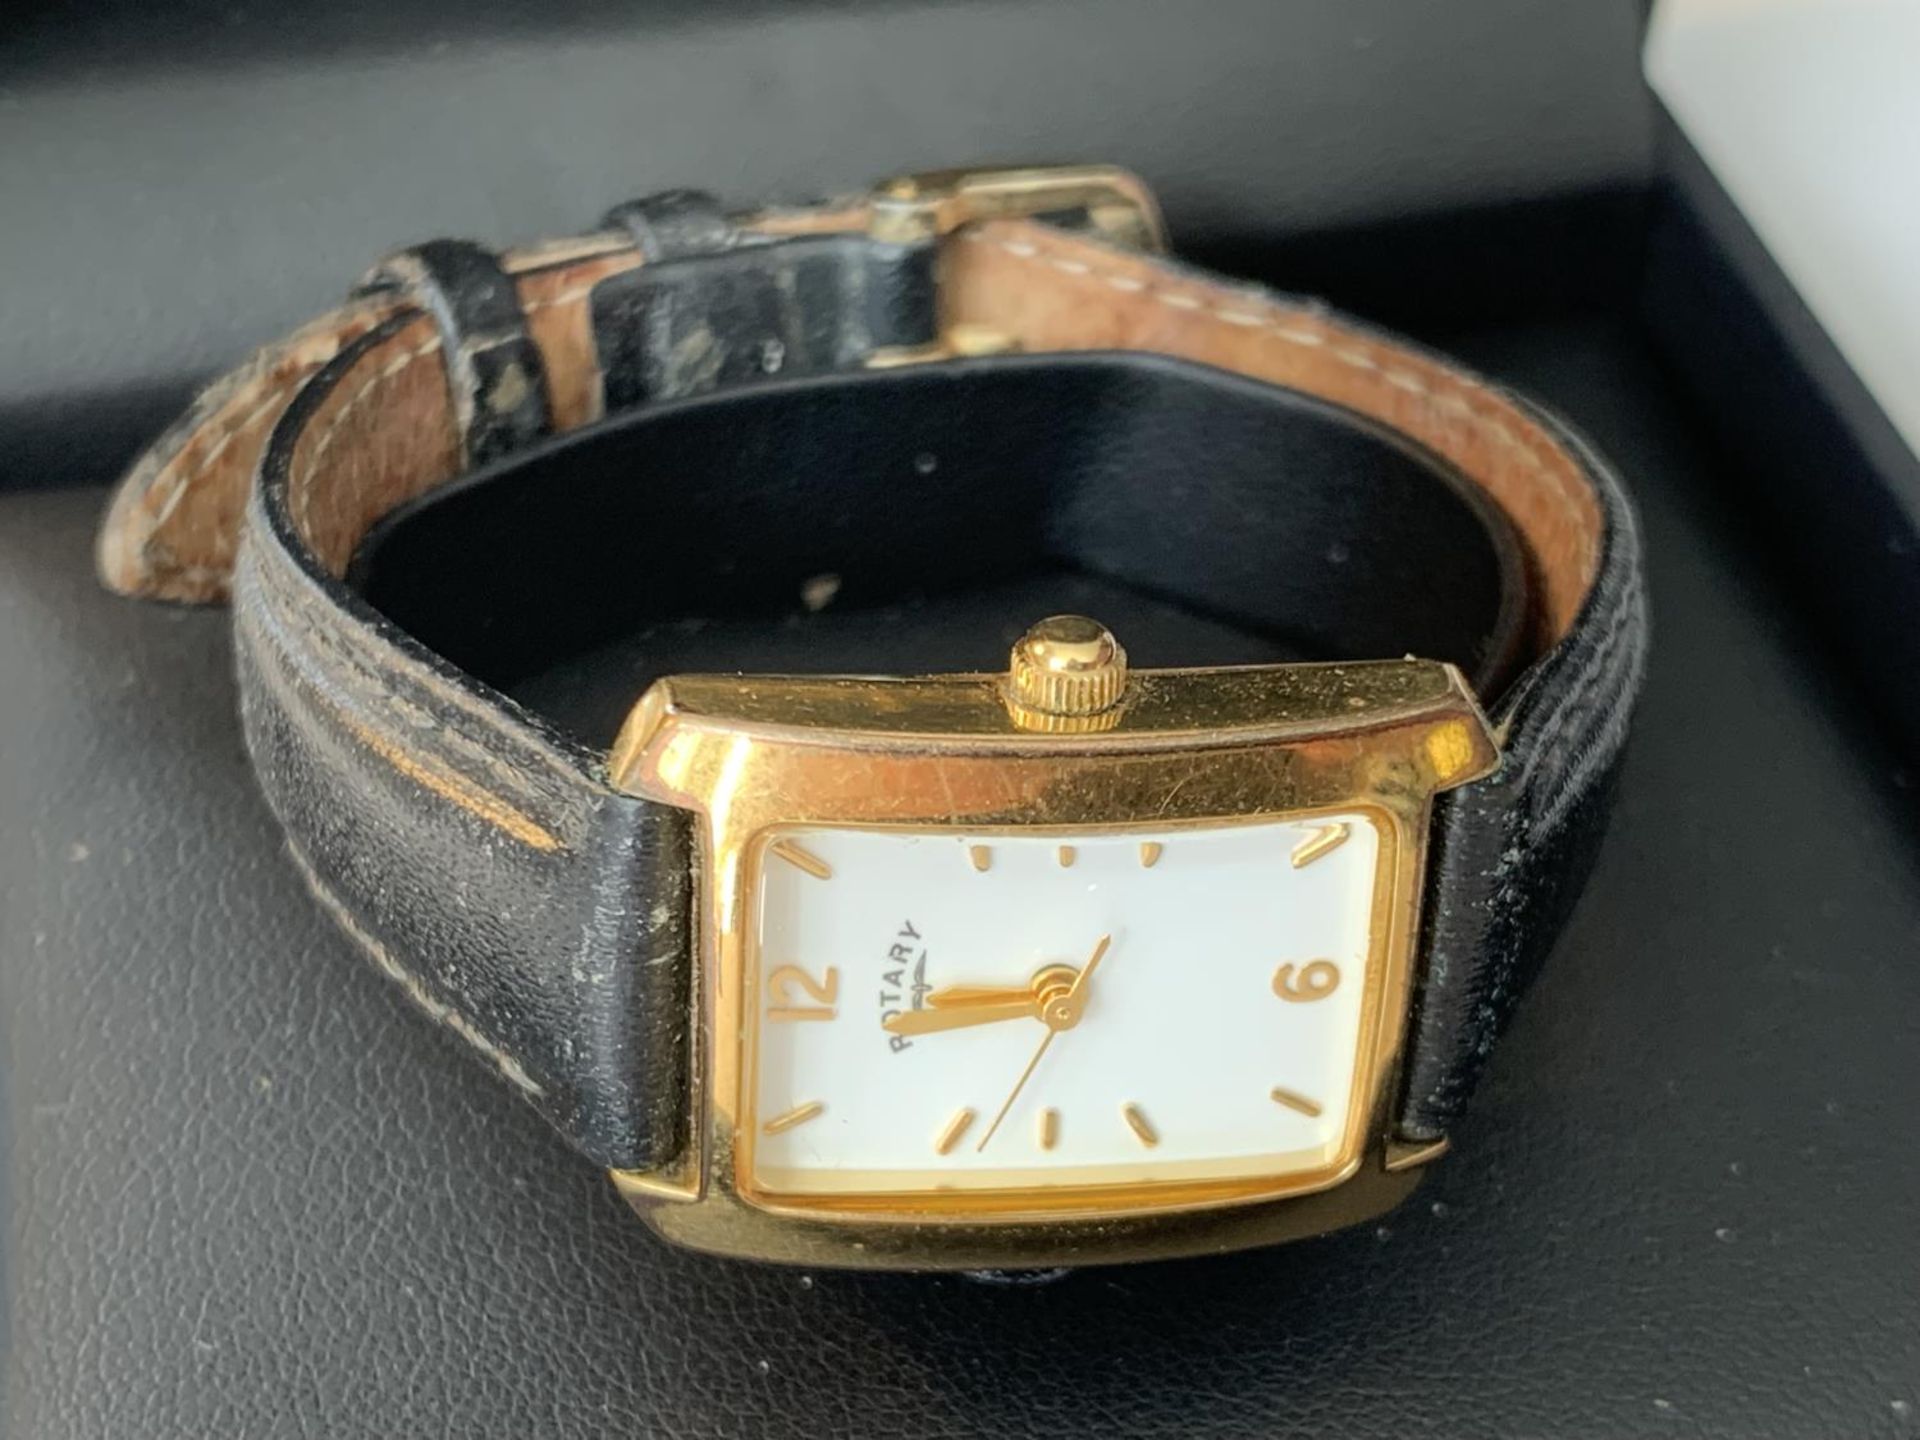 A LADIES ROTARY WRISTWATCH SEEN WORKING BUT NO WARRANTY IN A PRESENTATION BOX